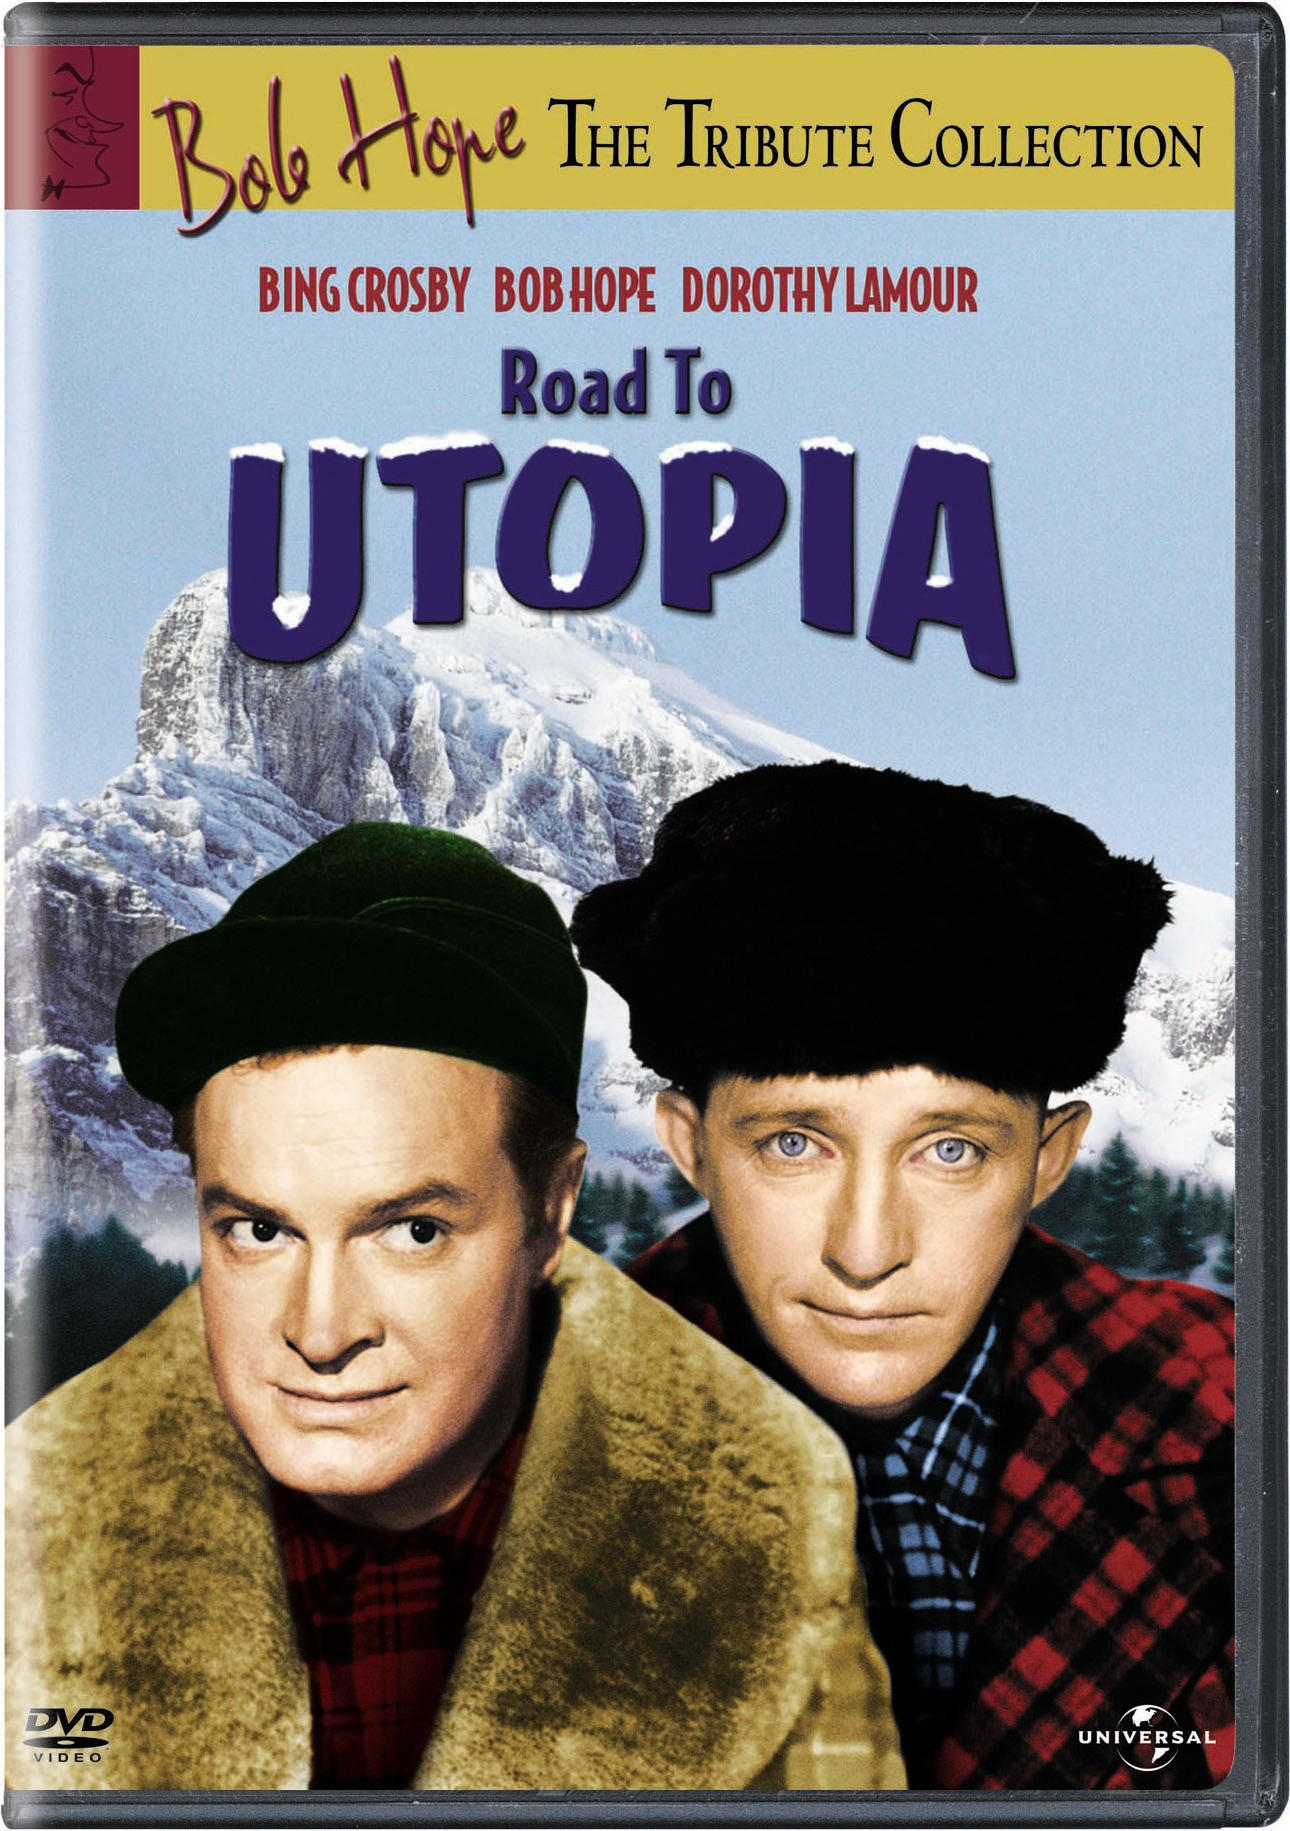 Road To Utopia - DVD [ 1946 ]  - Classic Movies On DVD - Movies On GRUV